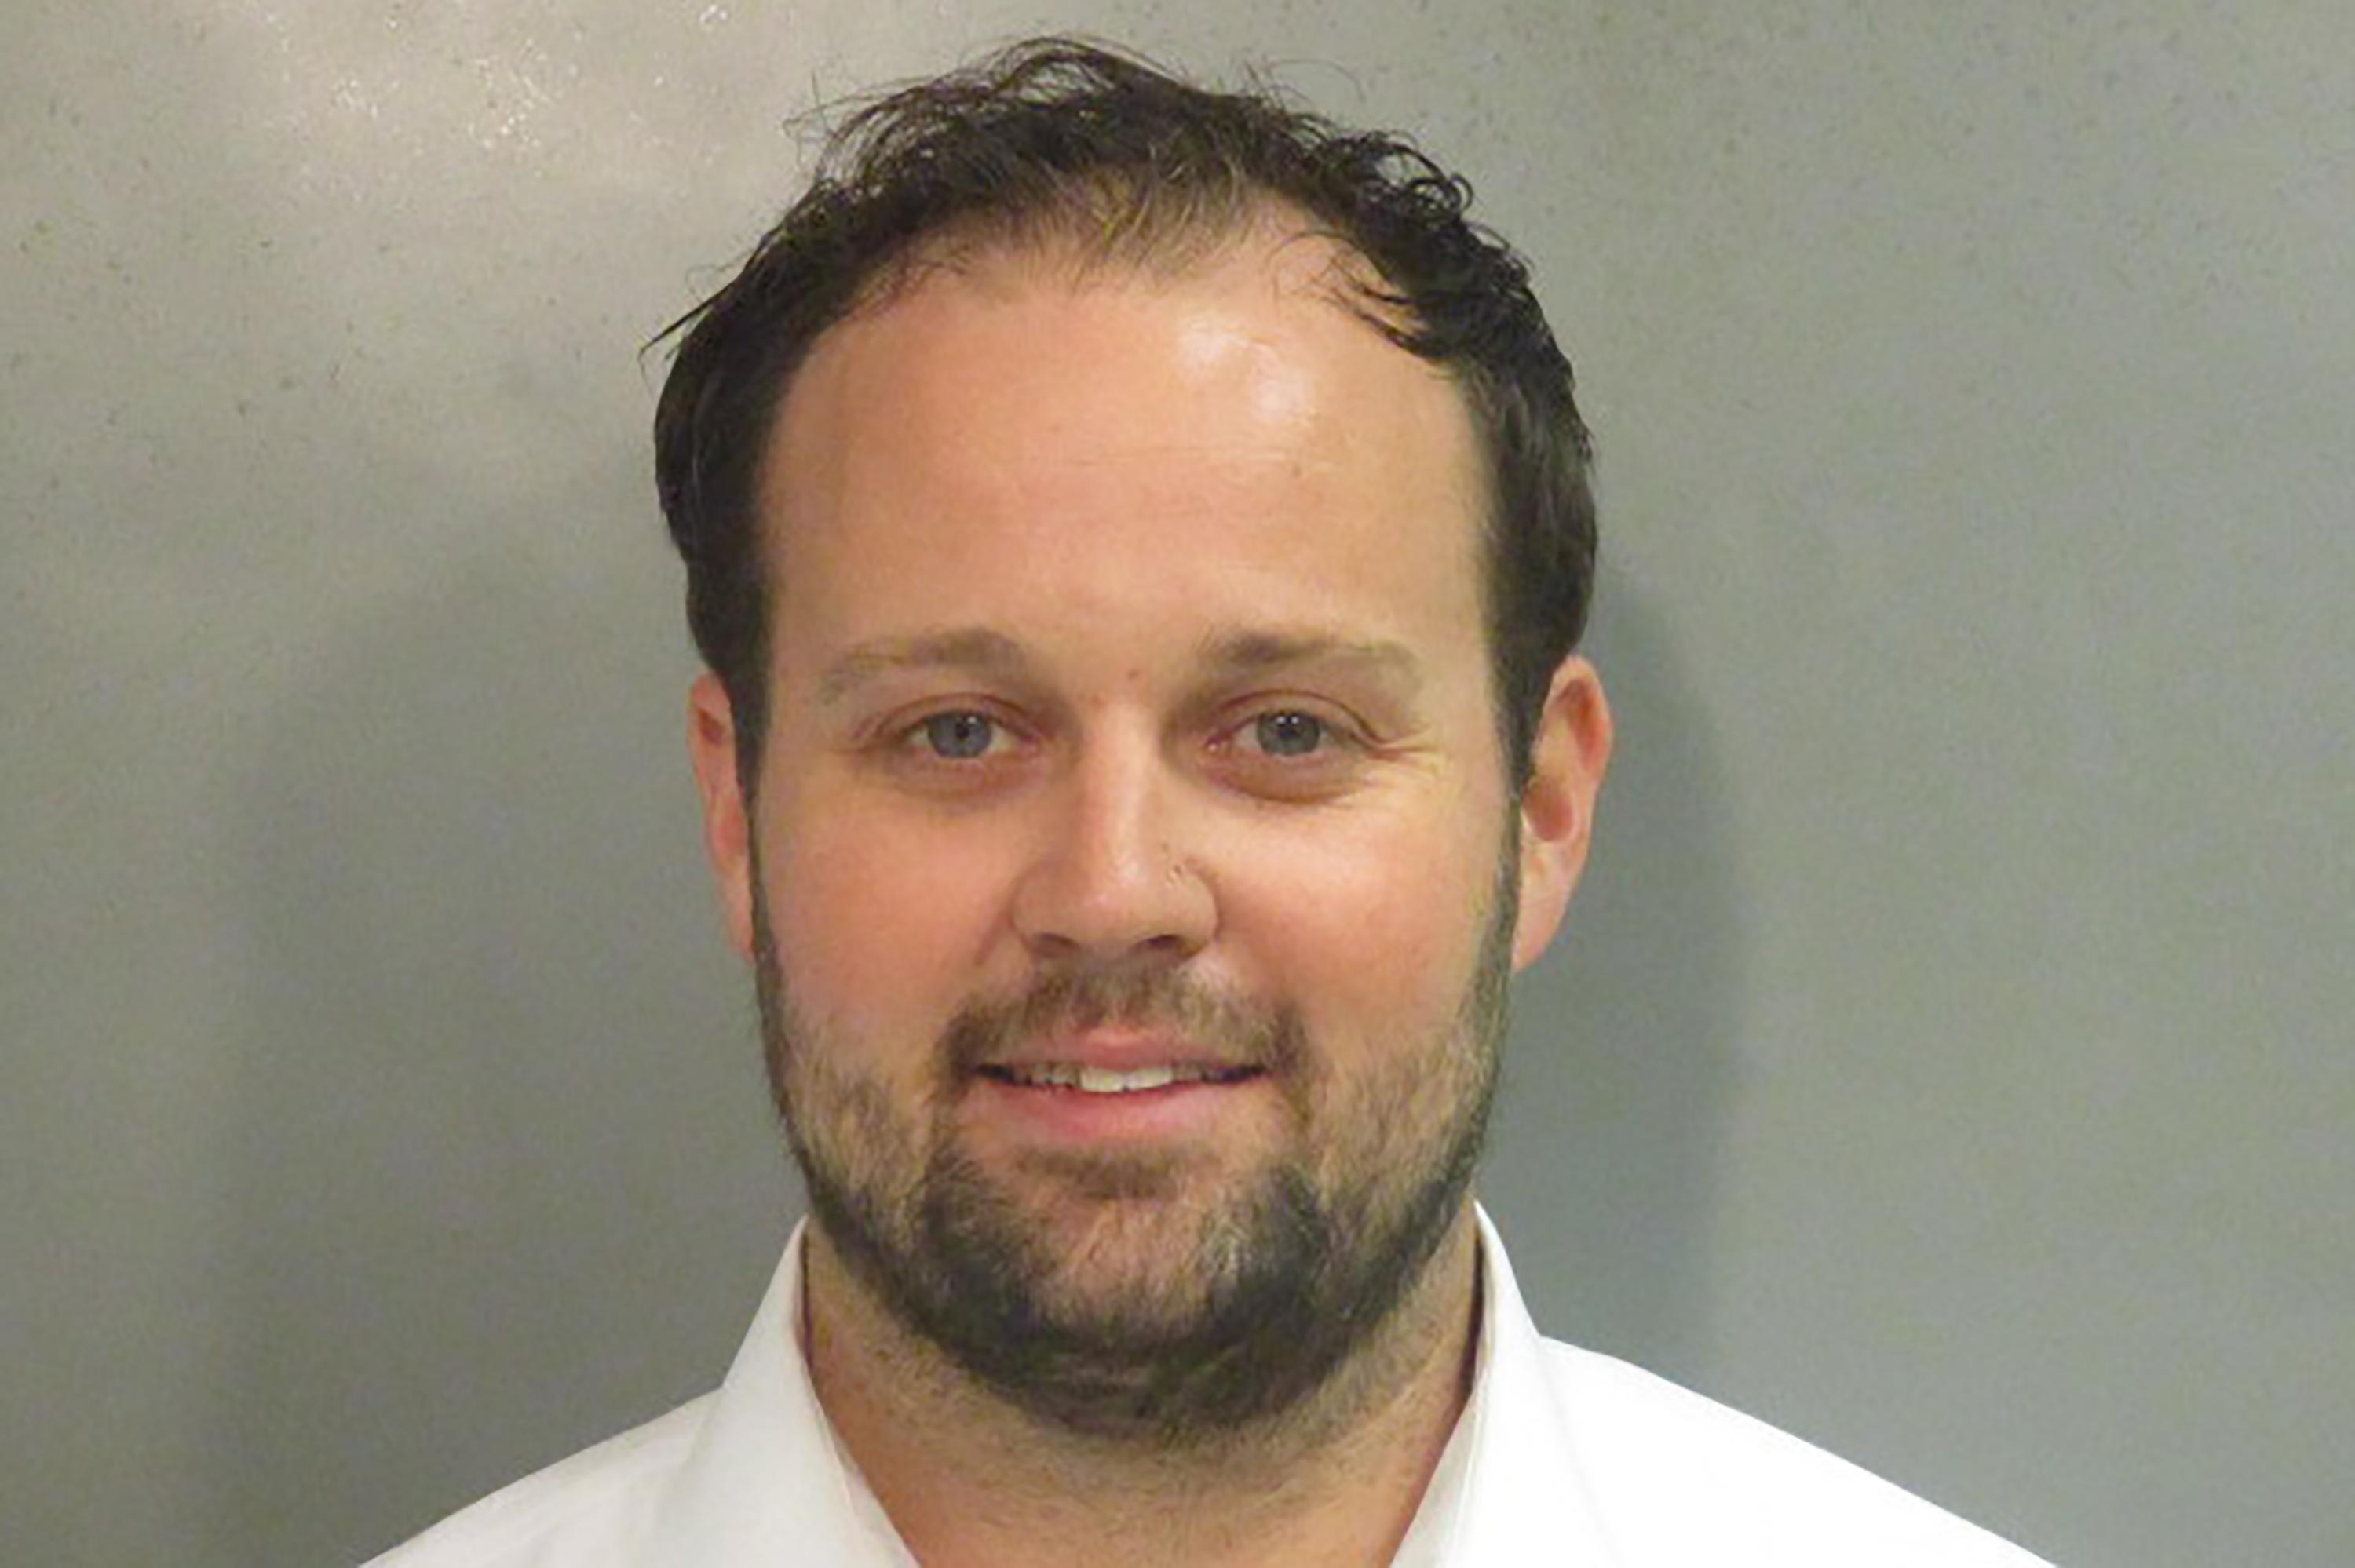 Ex-reality star Josh Duggar to be sentenced for child porn